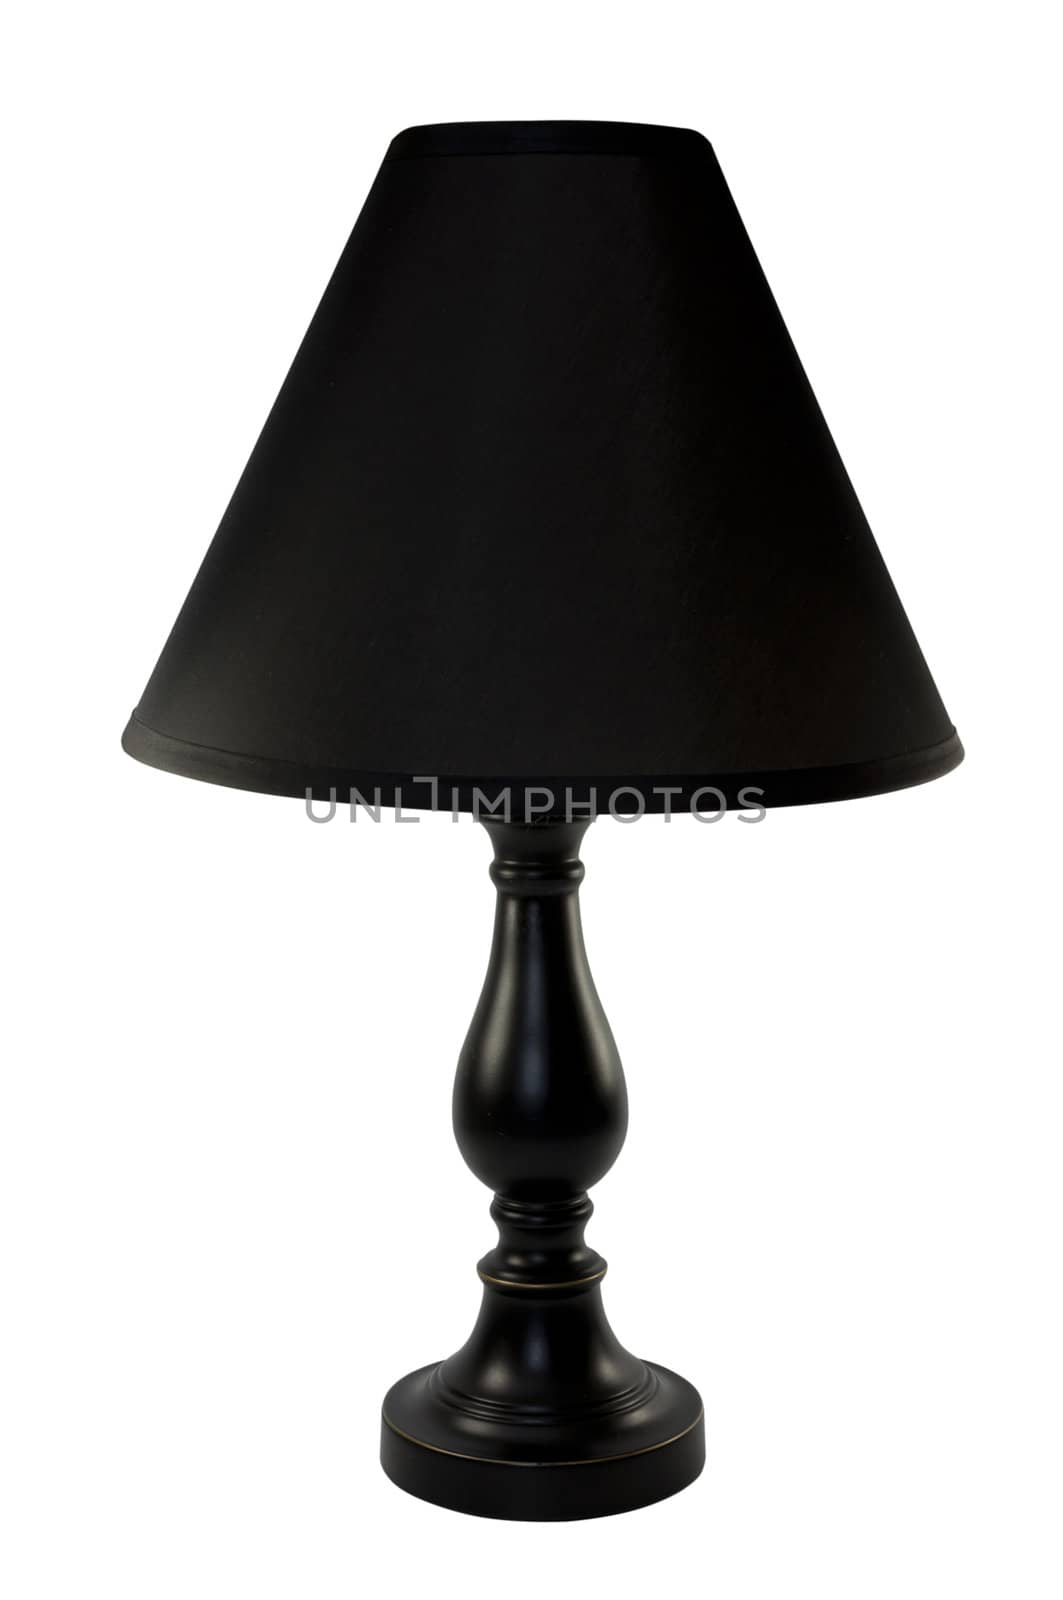 Black lamp isolated on white background with clipping path.